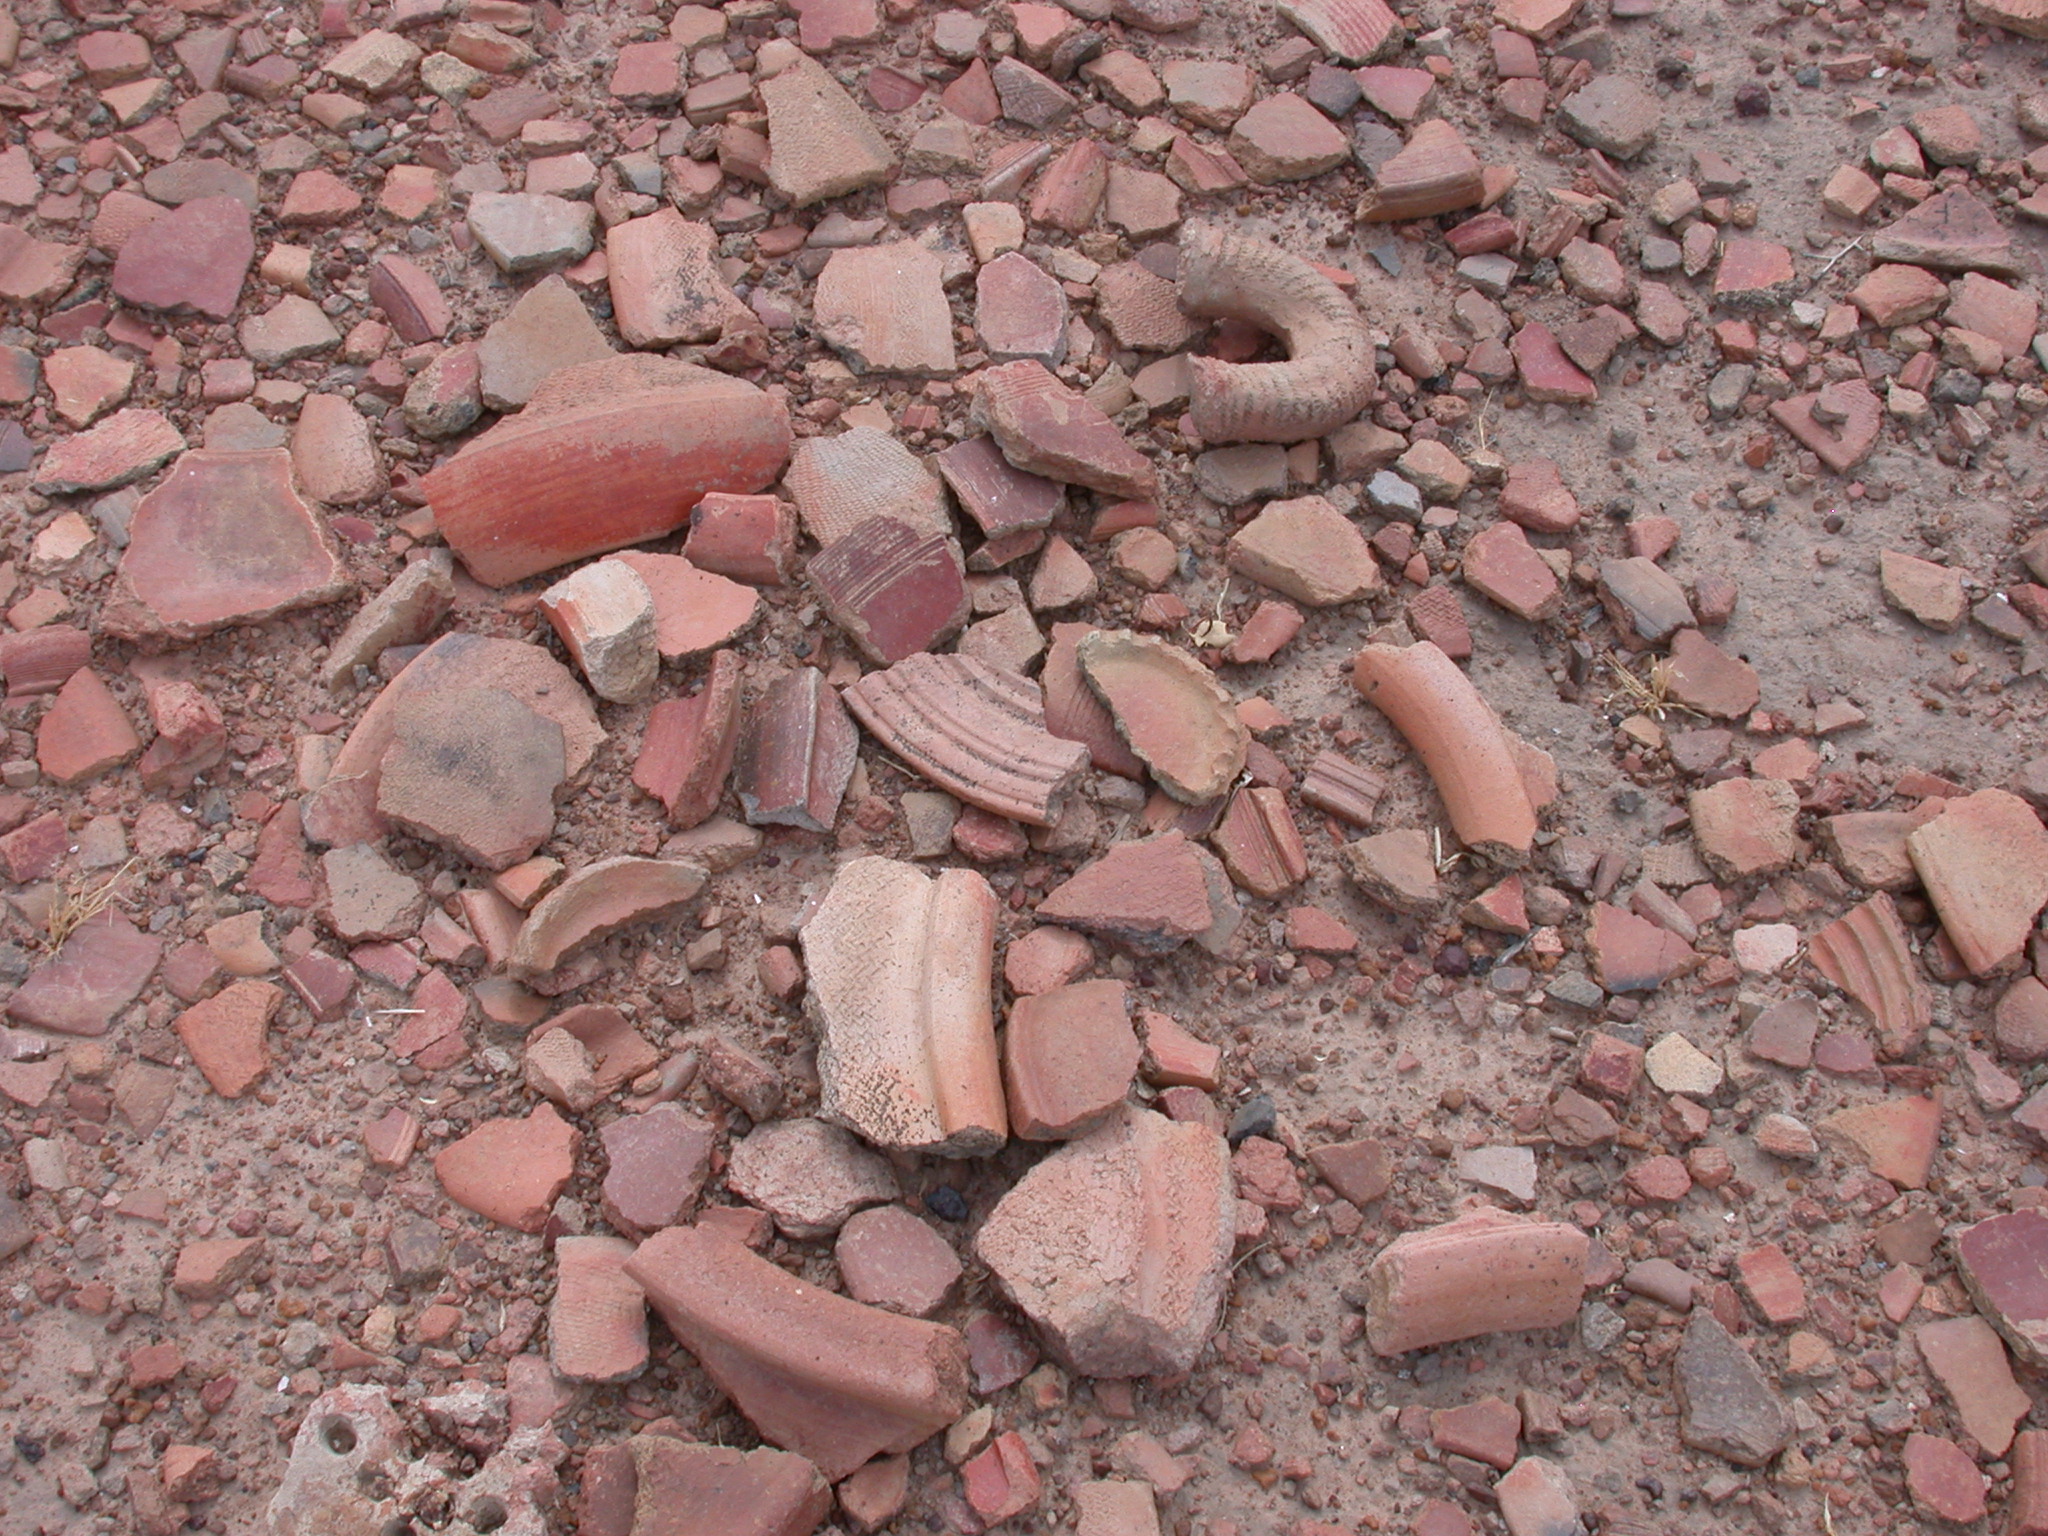 Pottery Fragments in Ruins of Ancient City of Jenne-Jeno, Mali